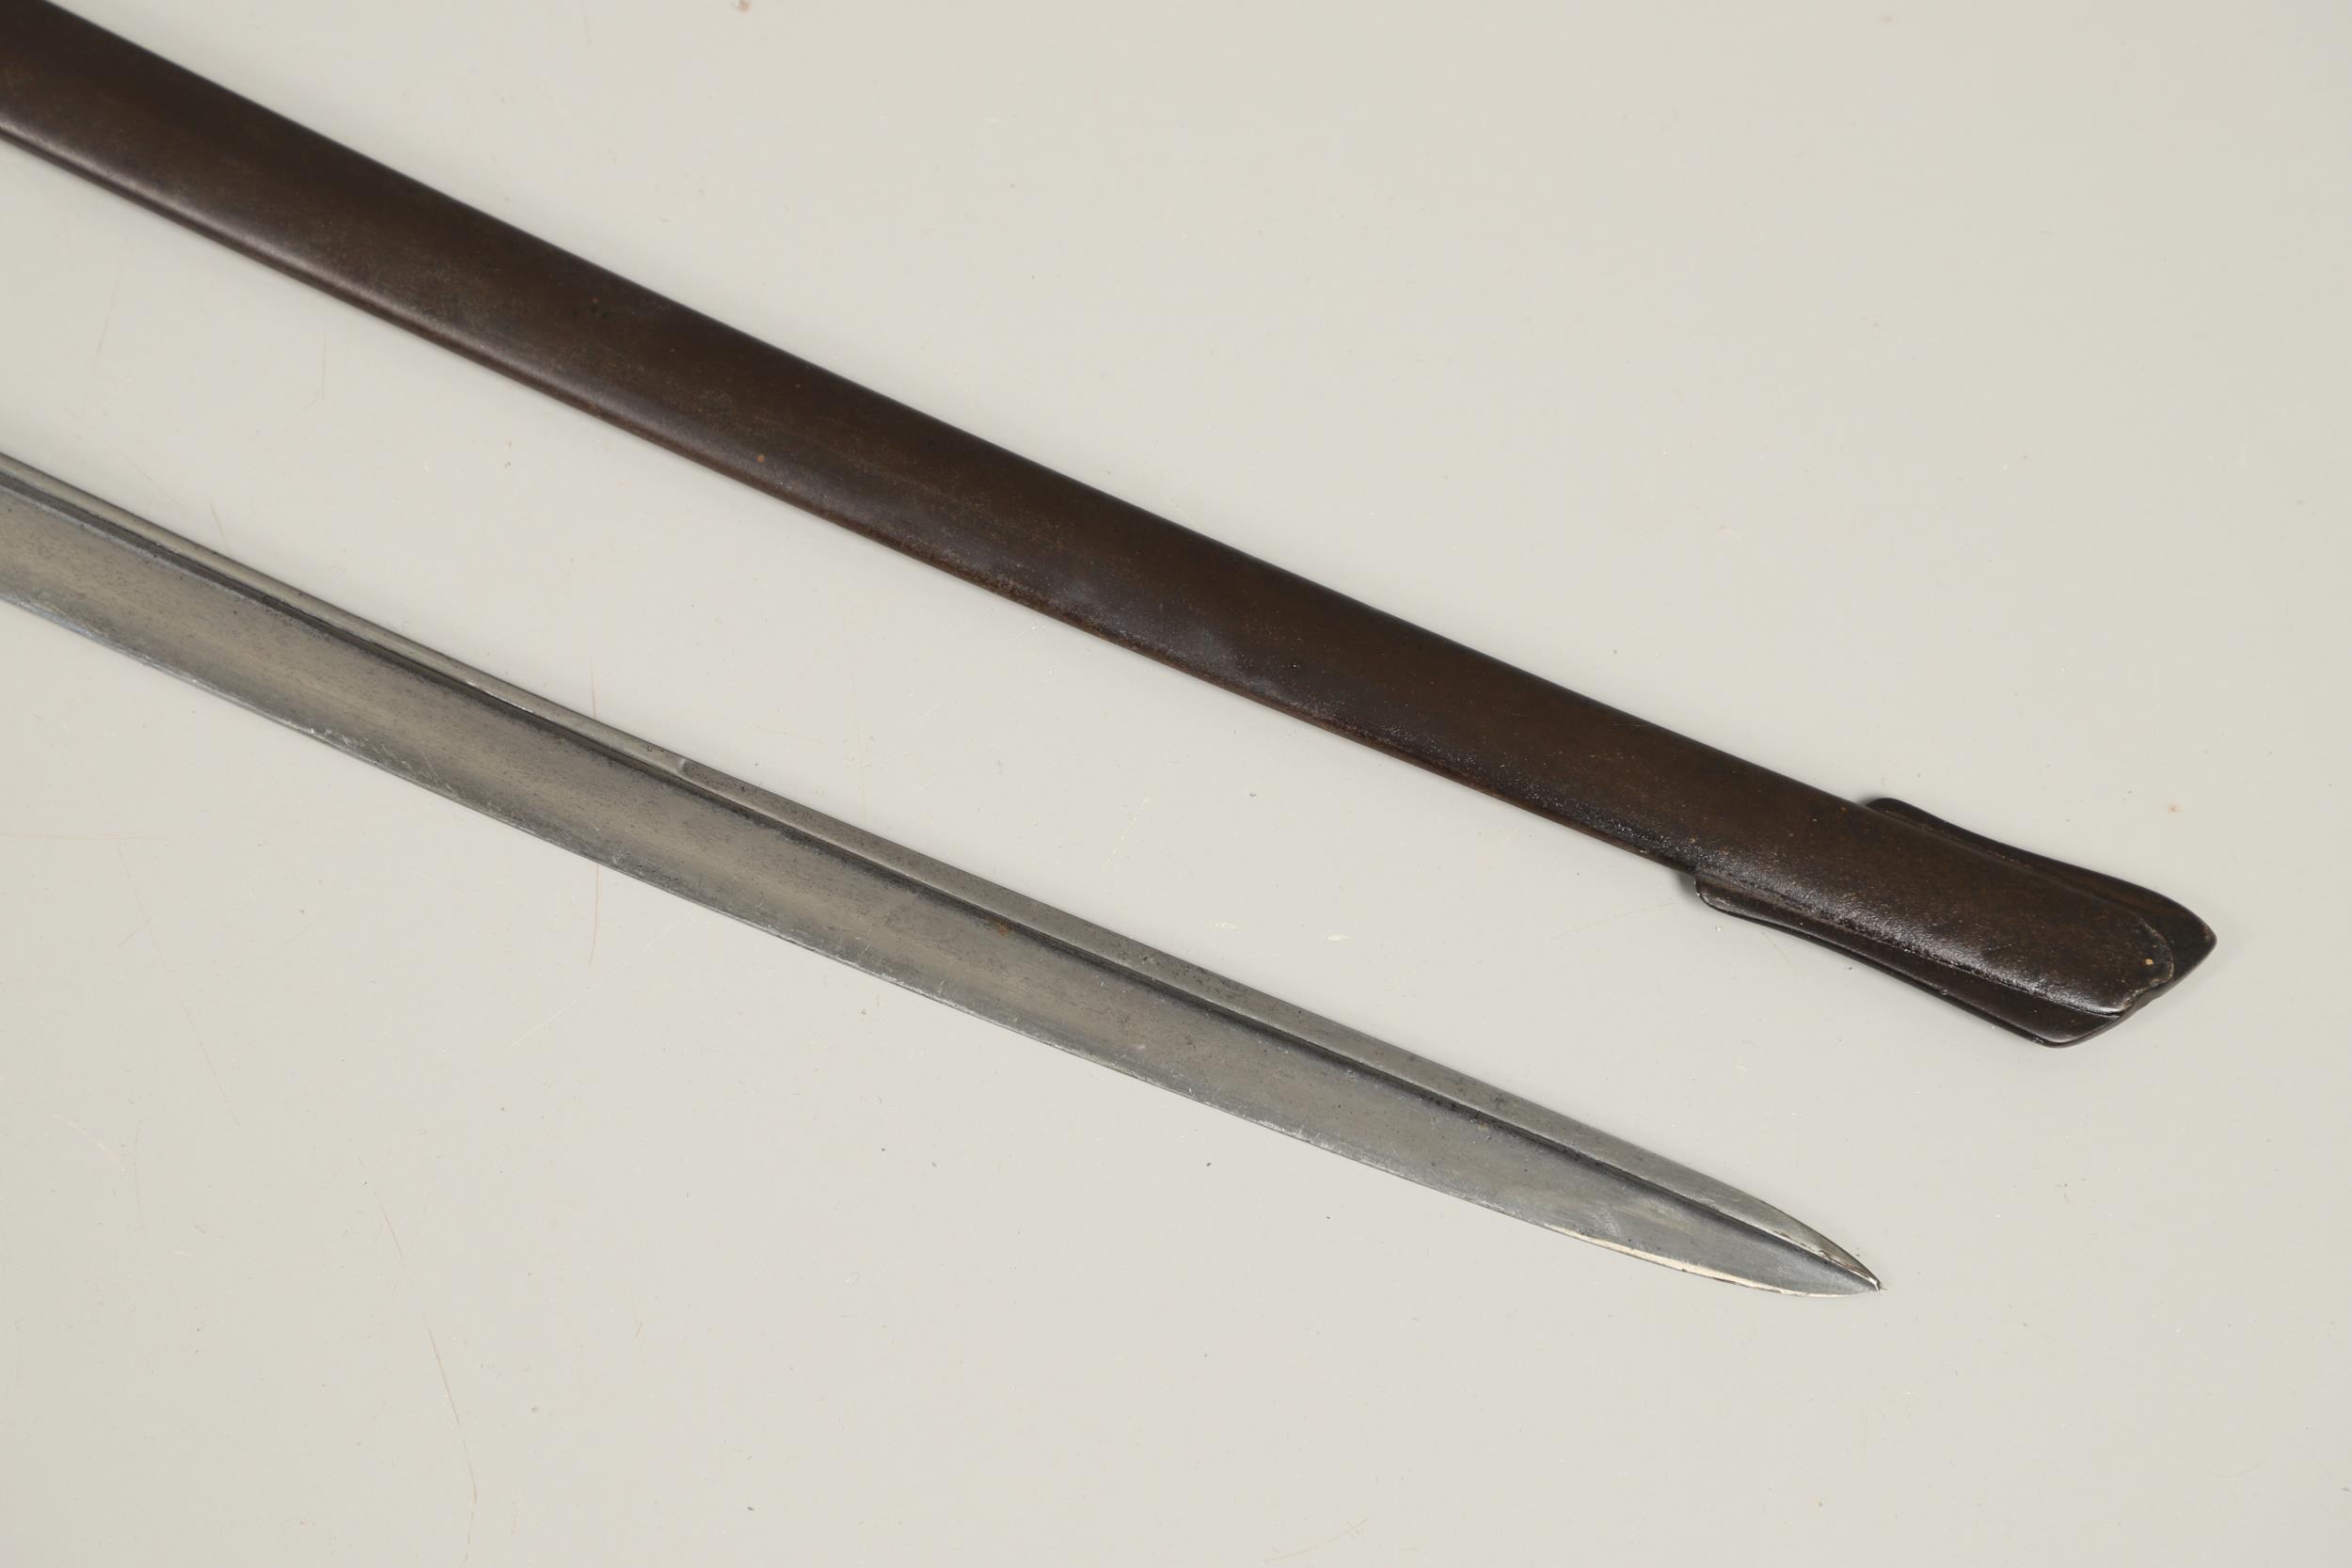 A CRIMEA PERIOD 1822 PATTERN LIGHT CAVALRY OFFICER'S SWORD AND SCABBARD. - Image 7 of 20